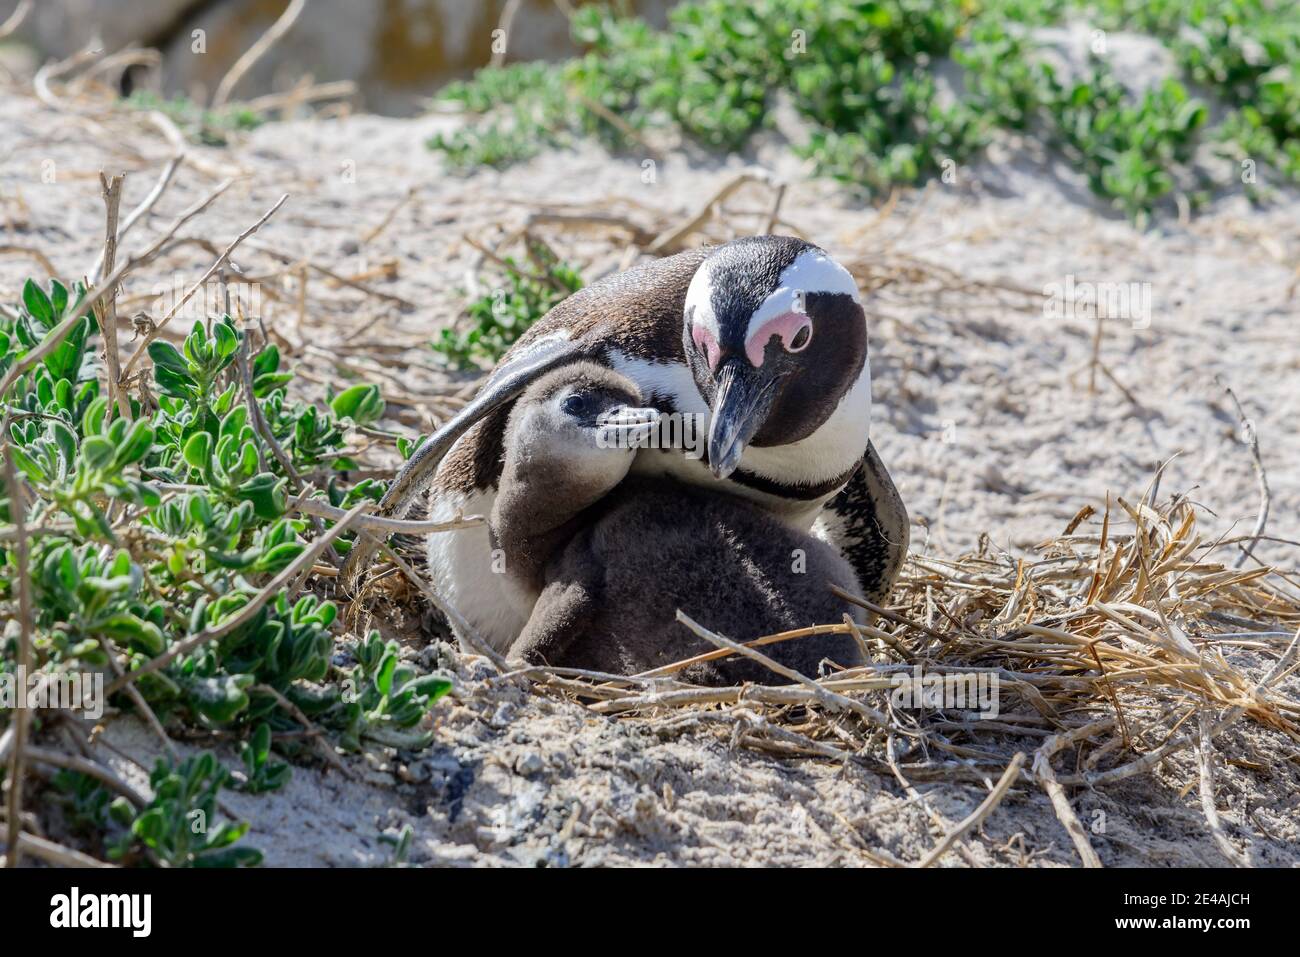 African penguin (Spheniscus demersus) taking care of the brood, Boulders Beach or Boulders Bay, Simons Town, South Africa, Indian Ocean Stock Photo